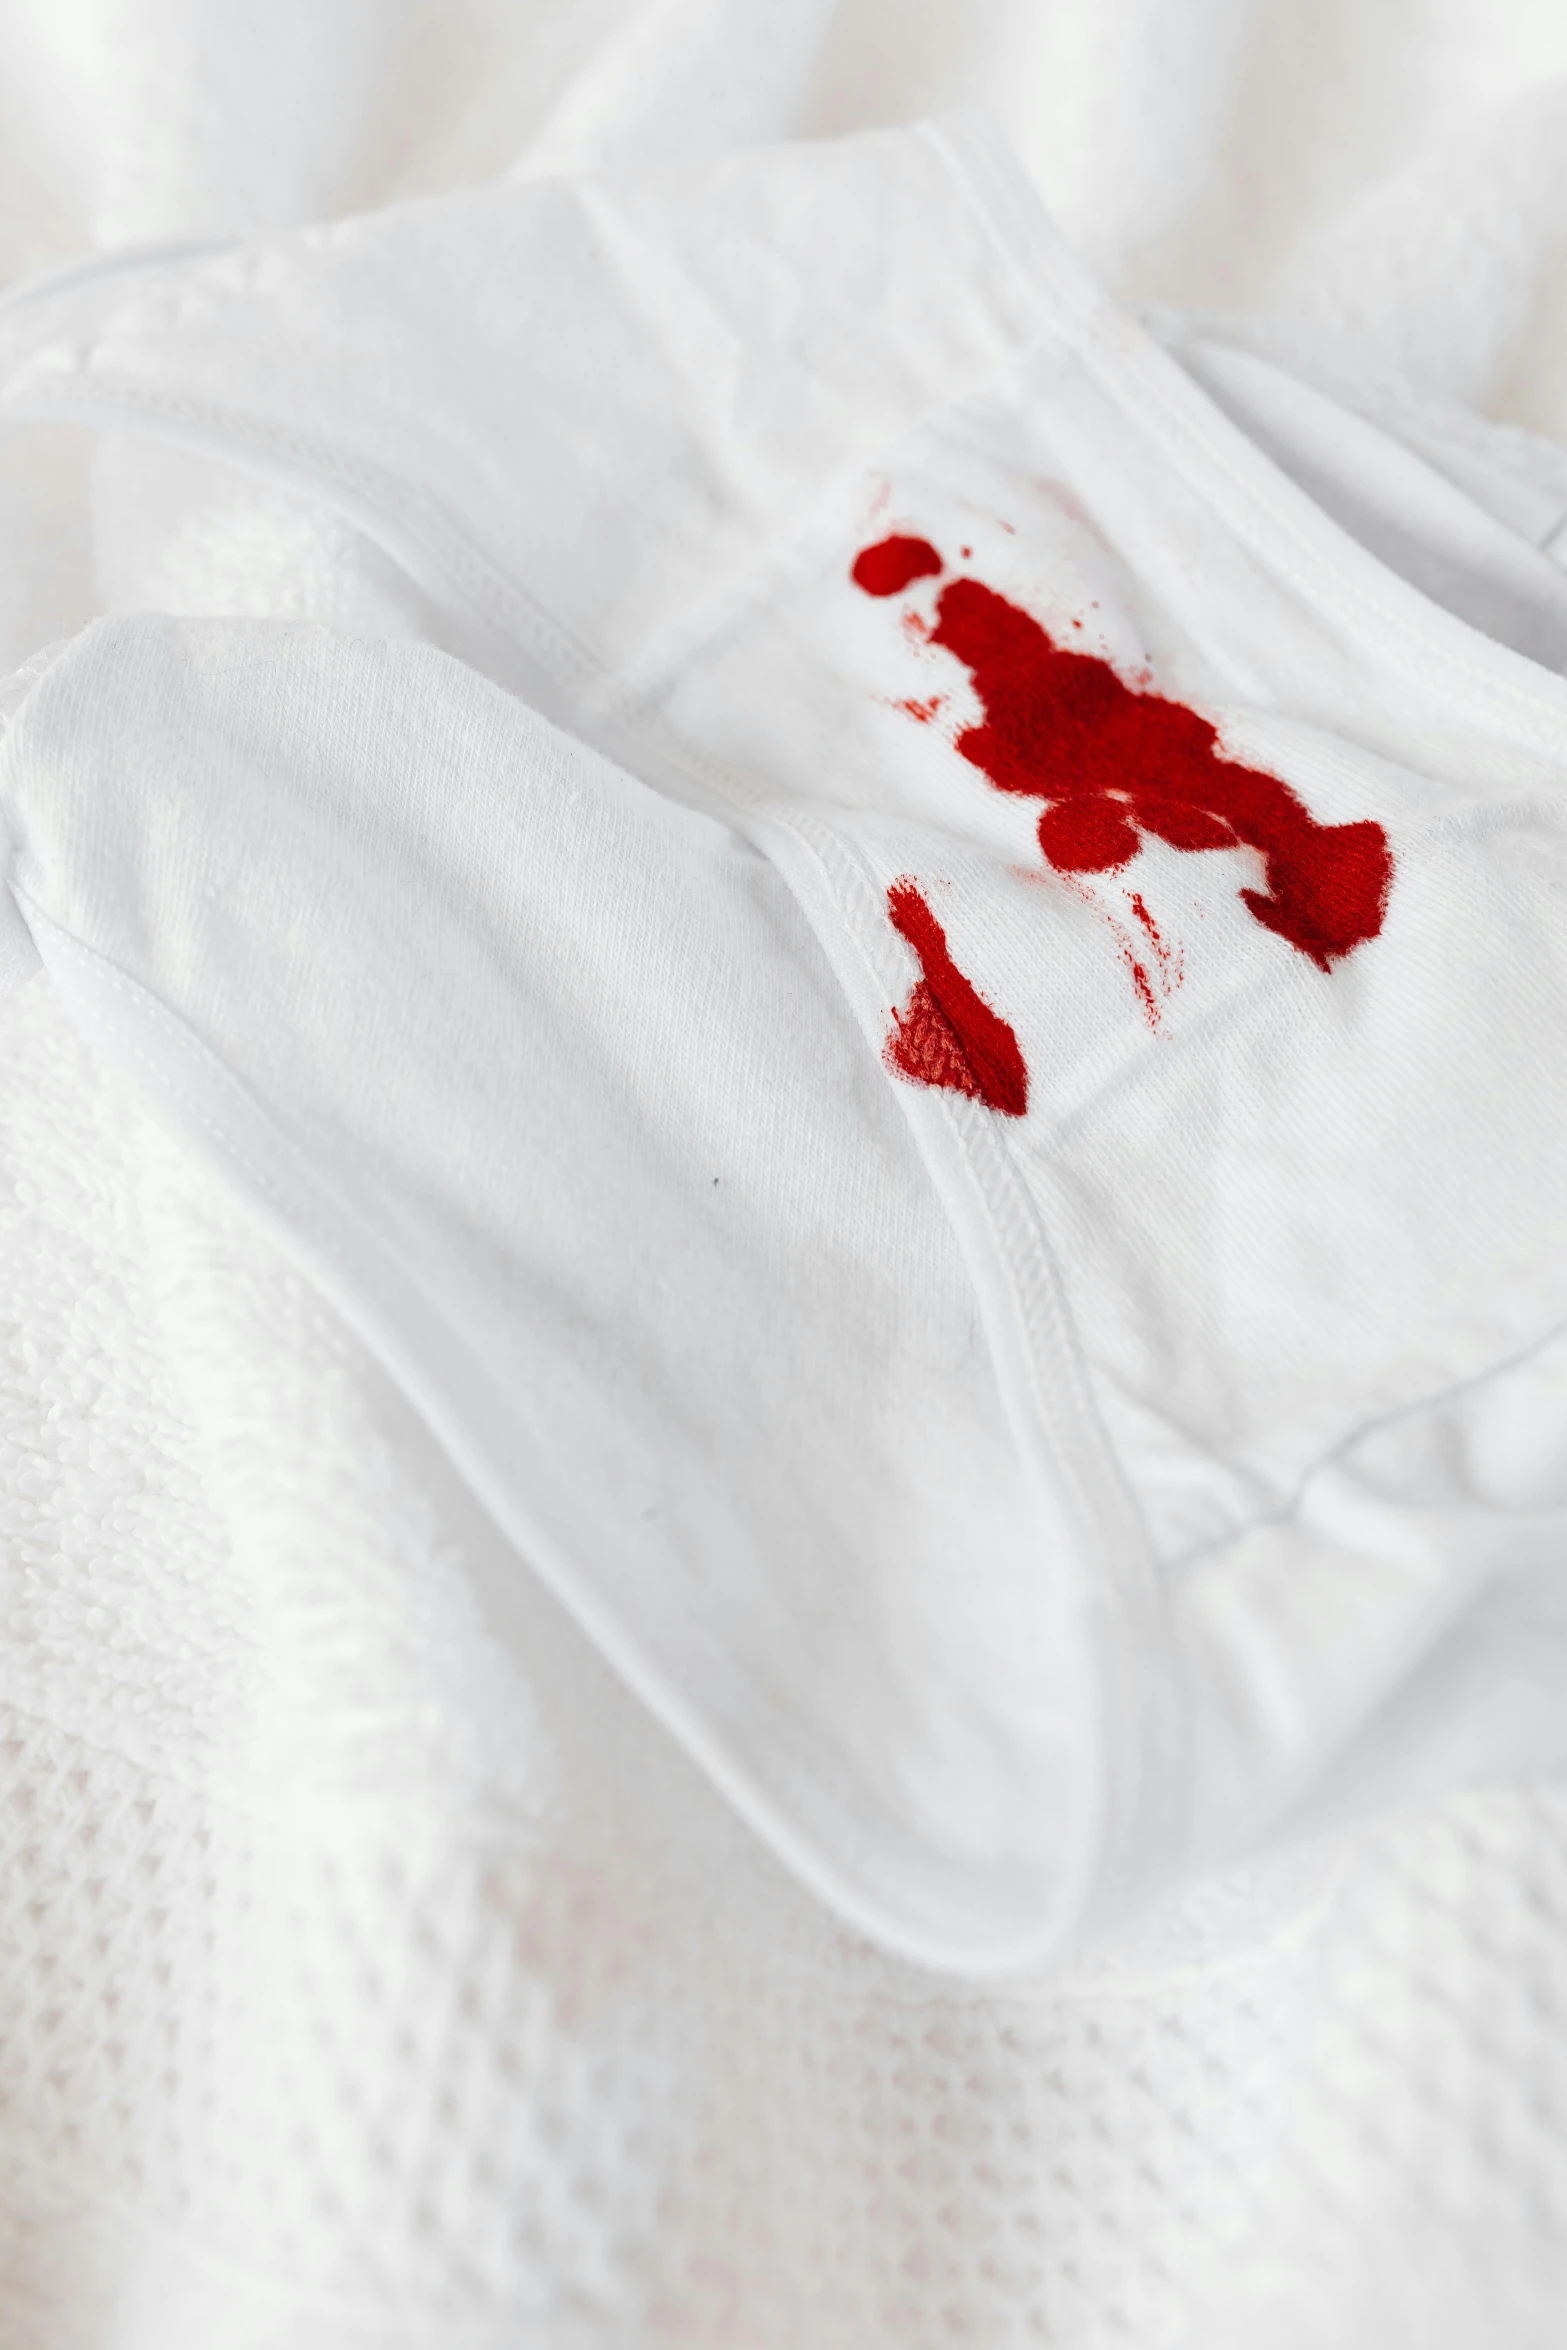 a white shirt with a blood stain on it, by Aileen Eagleton, happening, injured, ap, close-up photograph, white